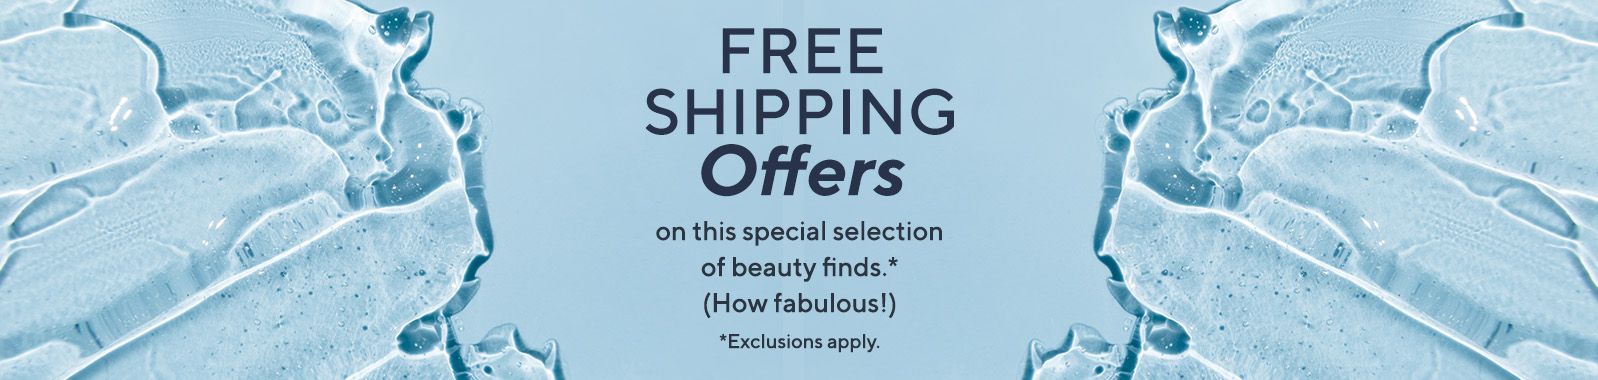 Free Shipping Offers on this special selection of beauty finds.* (How fabulous!) *Exclusions apply.